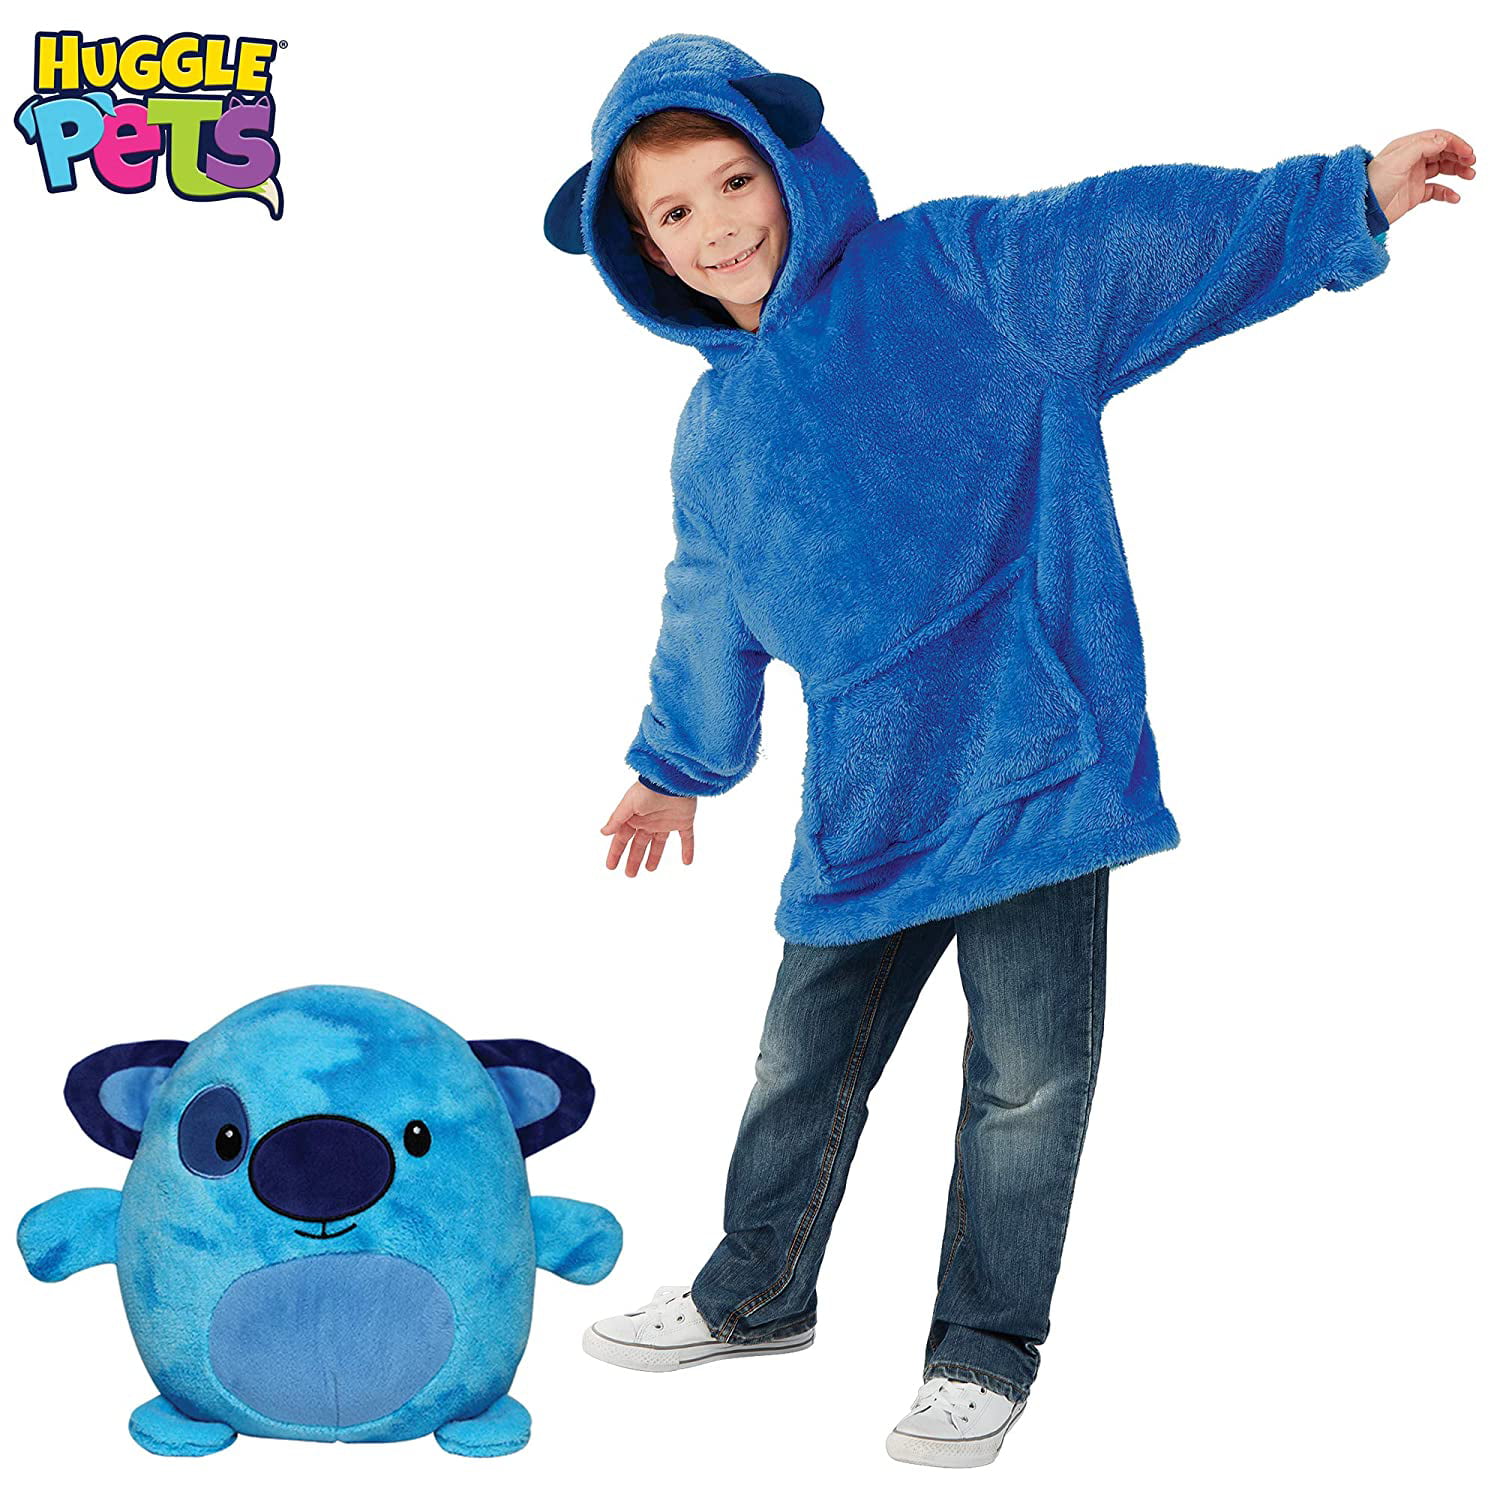 Gift for Boys Girls One Size Pullover Pajama Pillow Pets Hoodie Plush Animal Toys Turn Into Oversized Hoodie with Giant Pocket Long Sleeve Plush Sweatshirt 2-in-1 Animal Hoodie